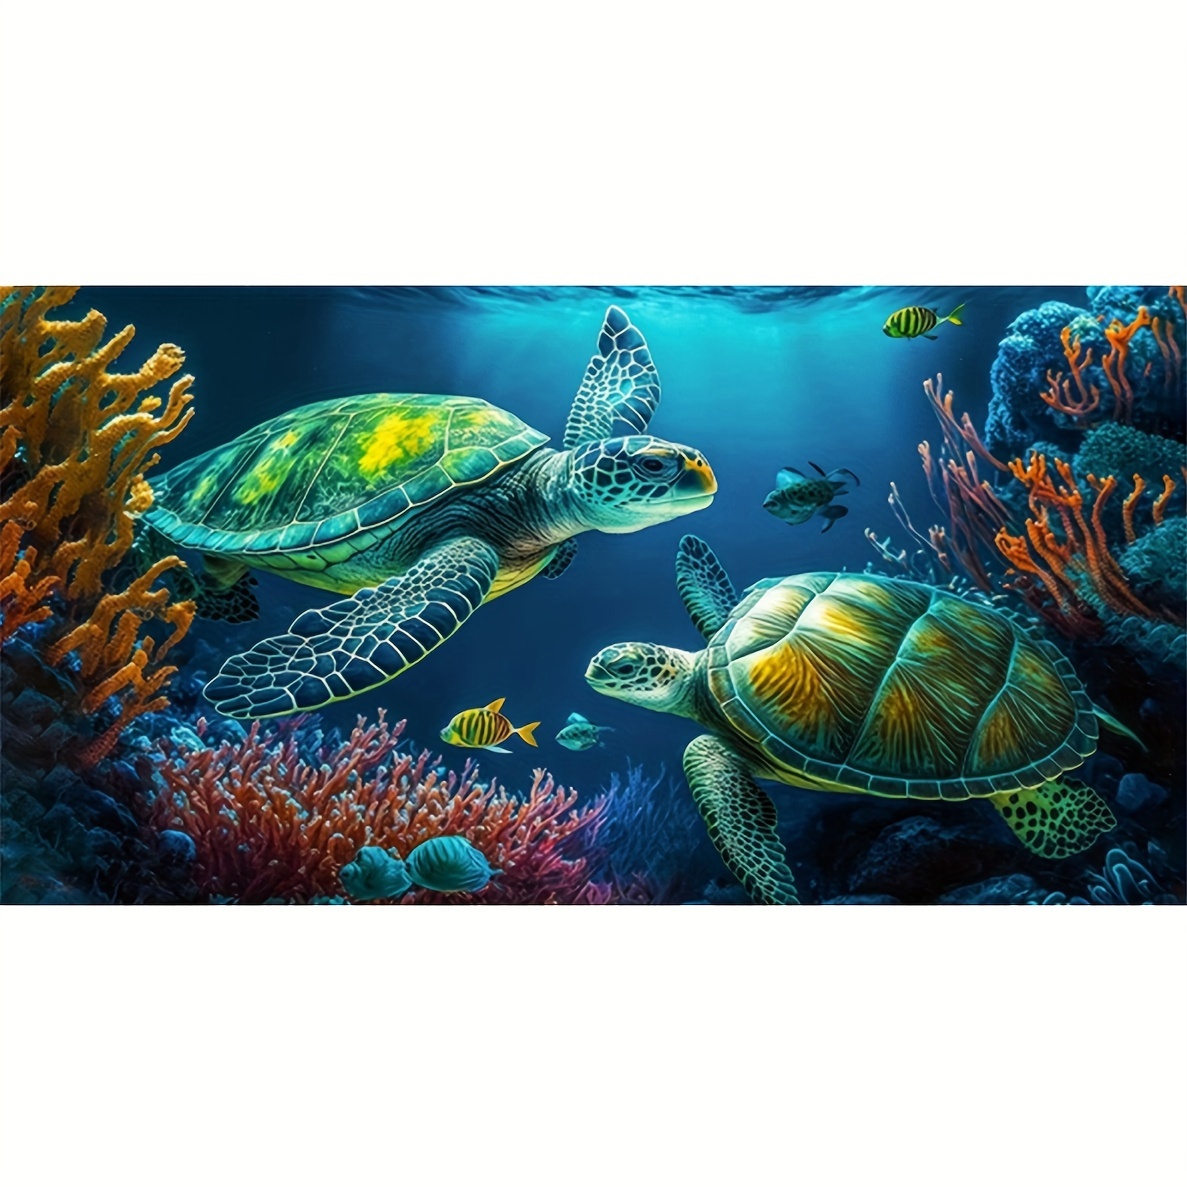 

1pc Large Size Turtle Pattern Diamond Art Painting Kit 5d Diamond Art Set Painting With Diamond Gems, Arts And Crafts For Home Wall Decor No Frame (50x100cm/19.7x39.4inch)